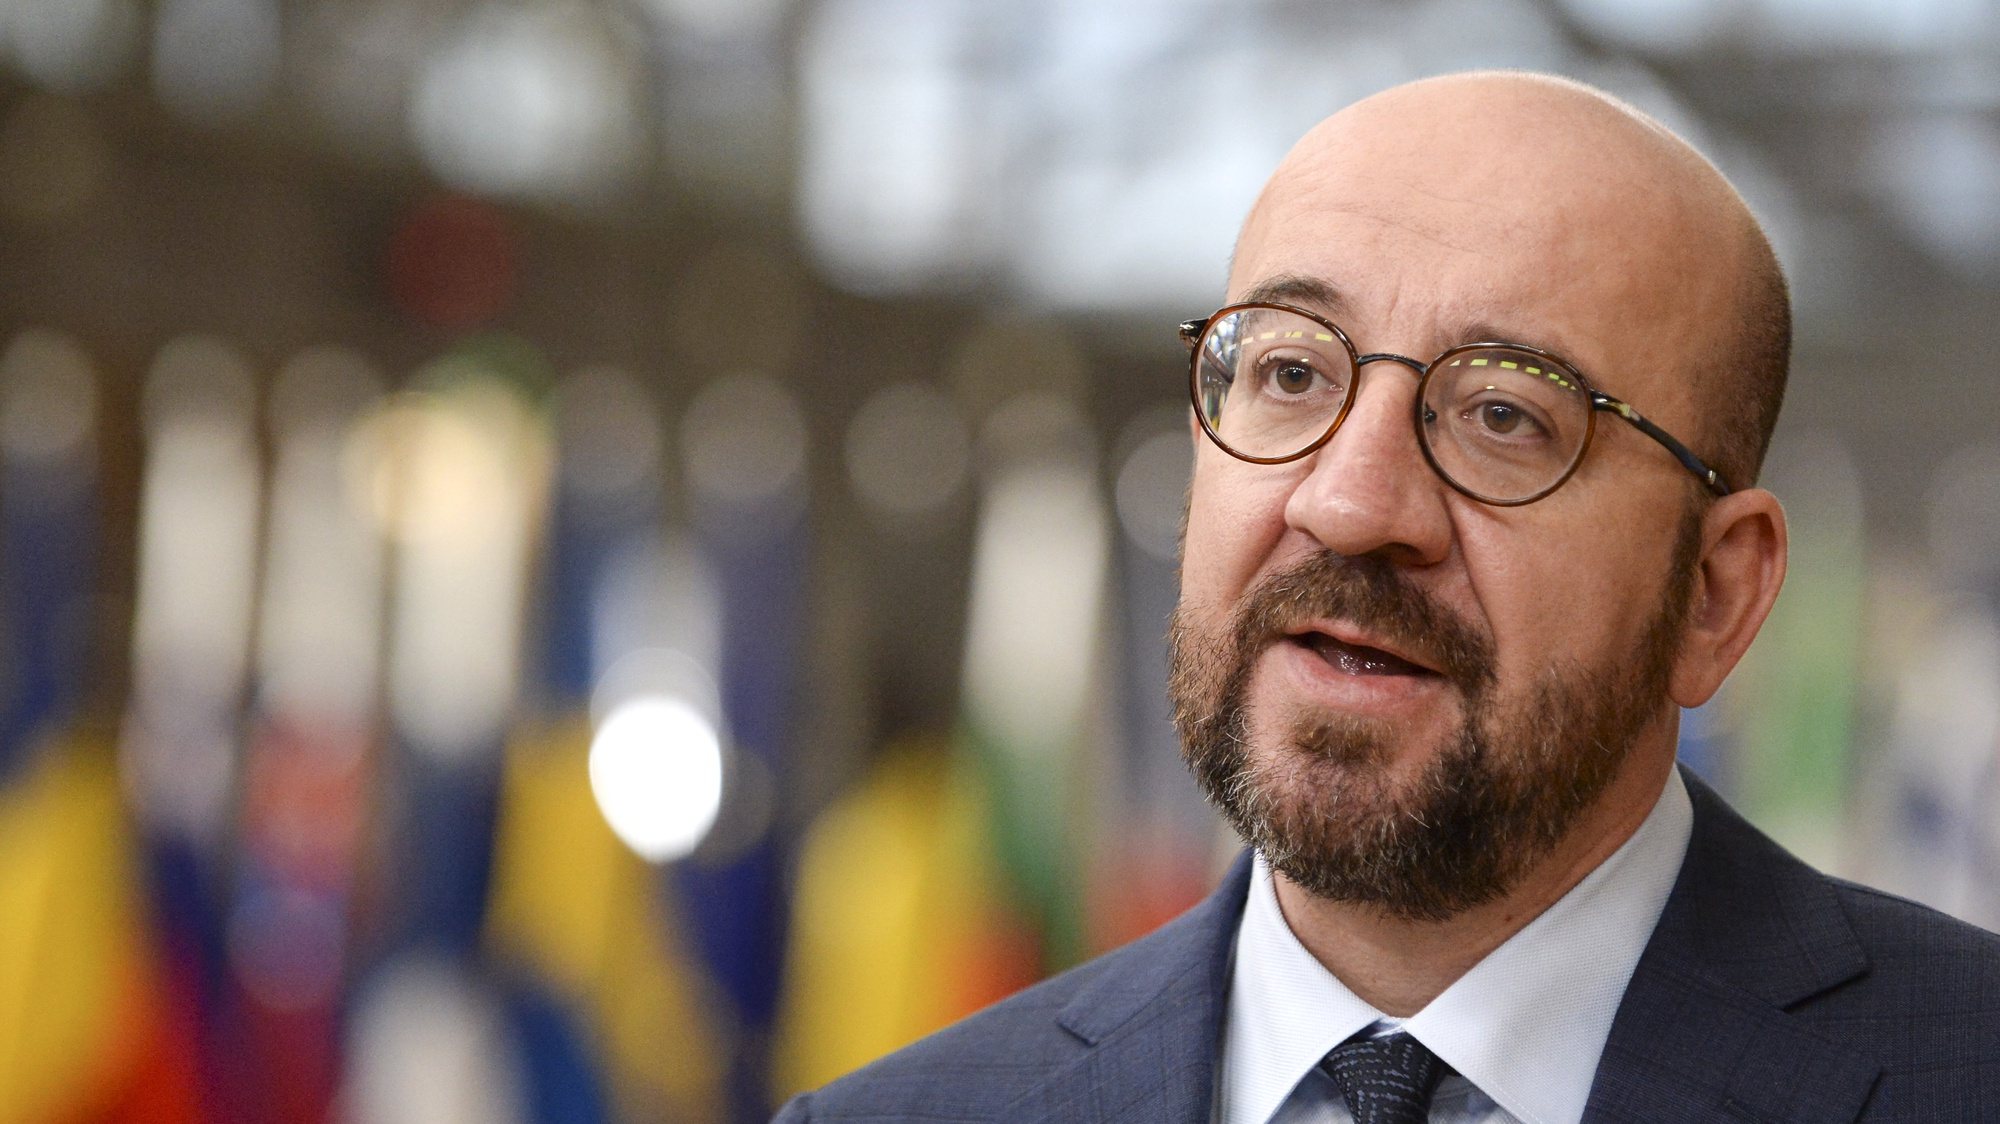 epa08749370 European Council President Charles Michel speaks to the media as he arrives for the second and last day of a face-to-face EU summit in Brussels, Belgium, 16 October 2020.  EPA/JOHANNA GERON / POOL